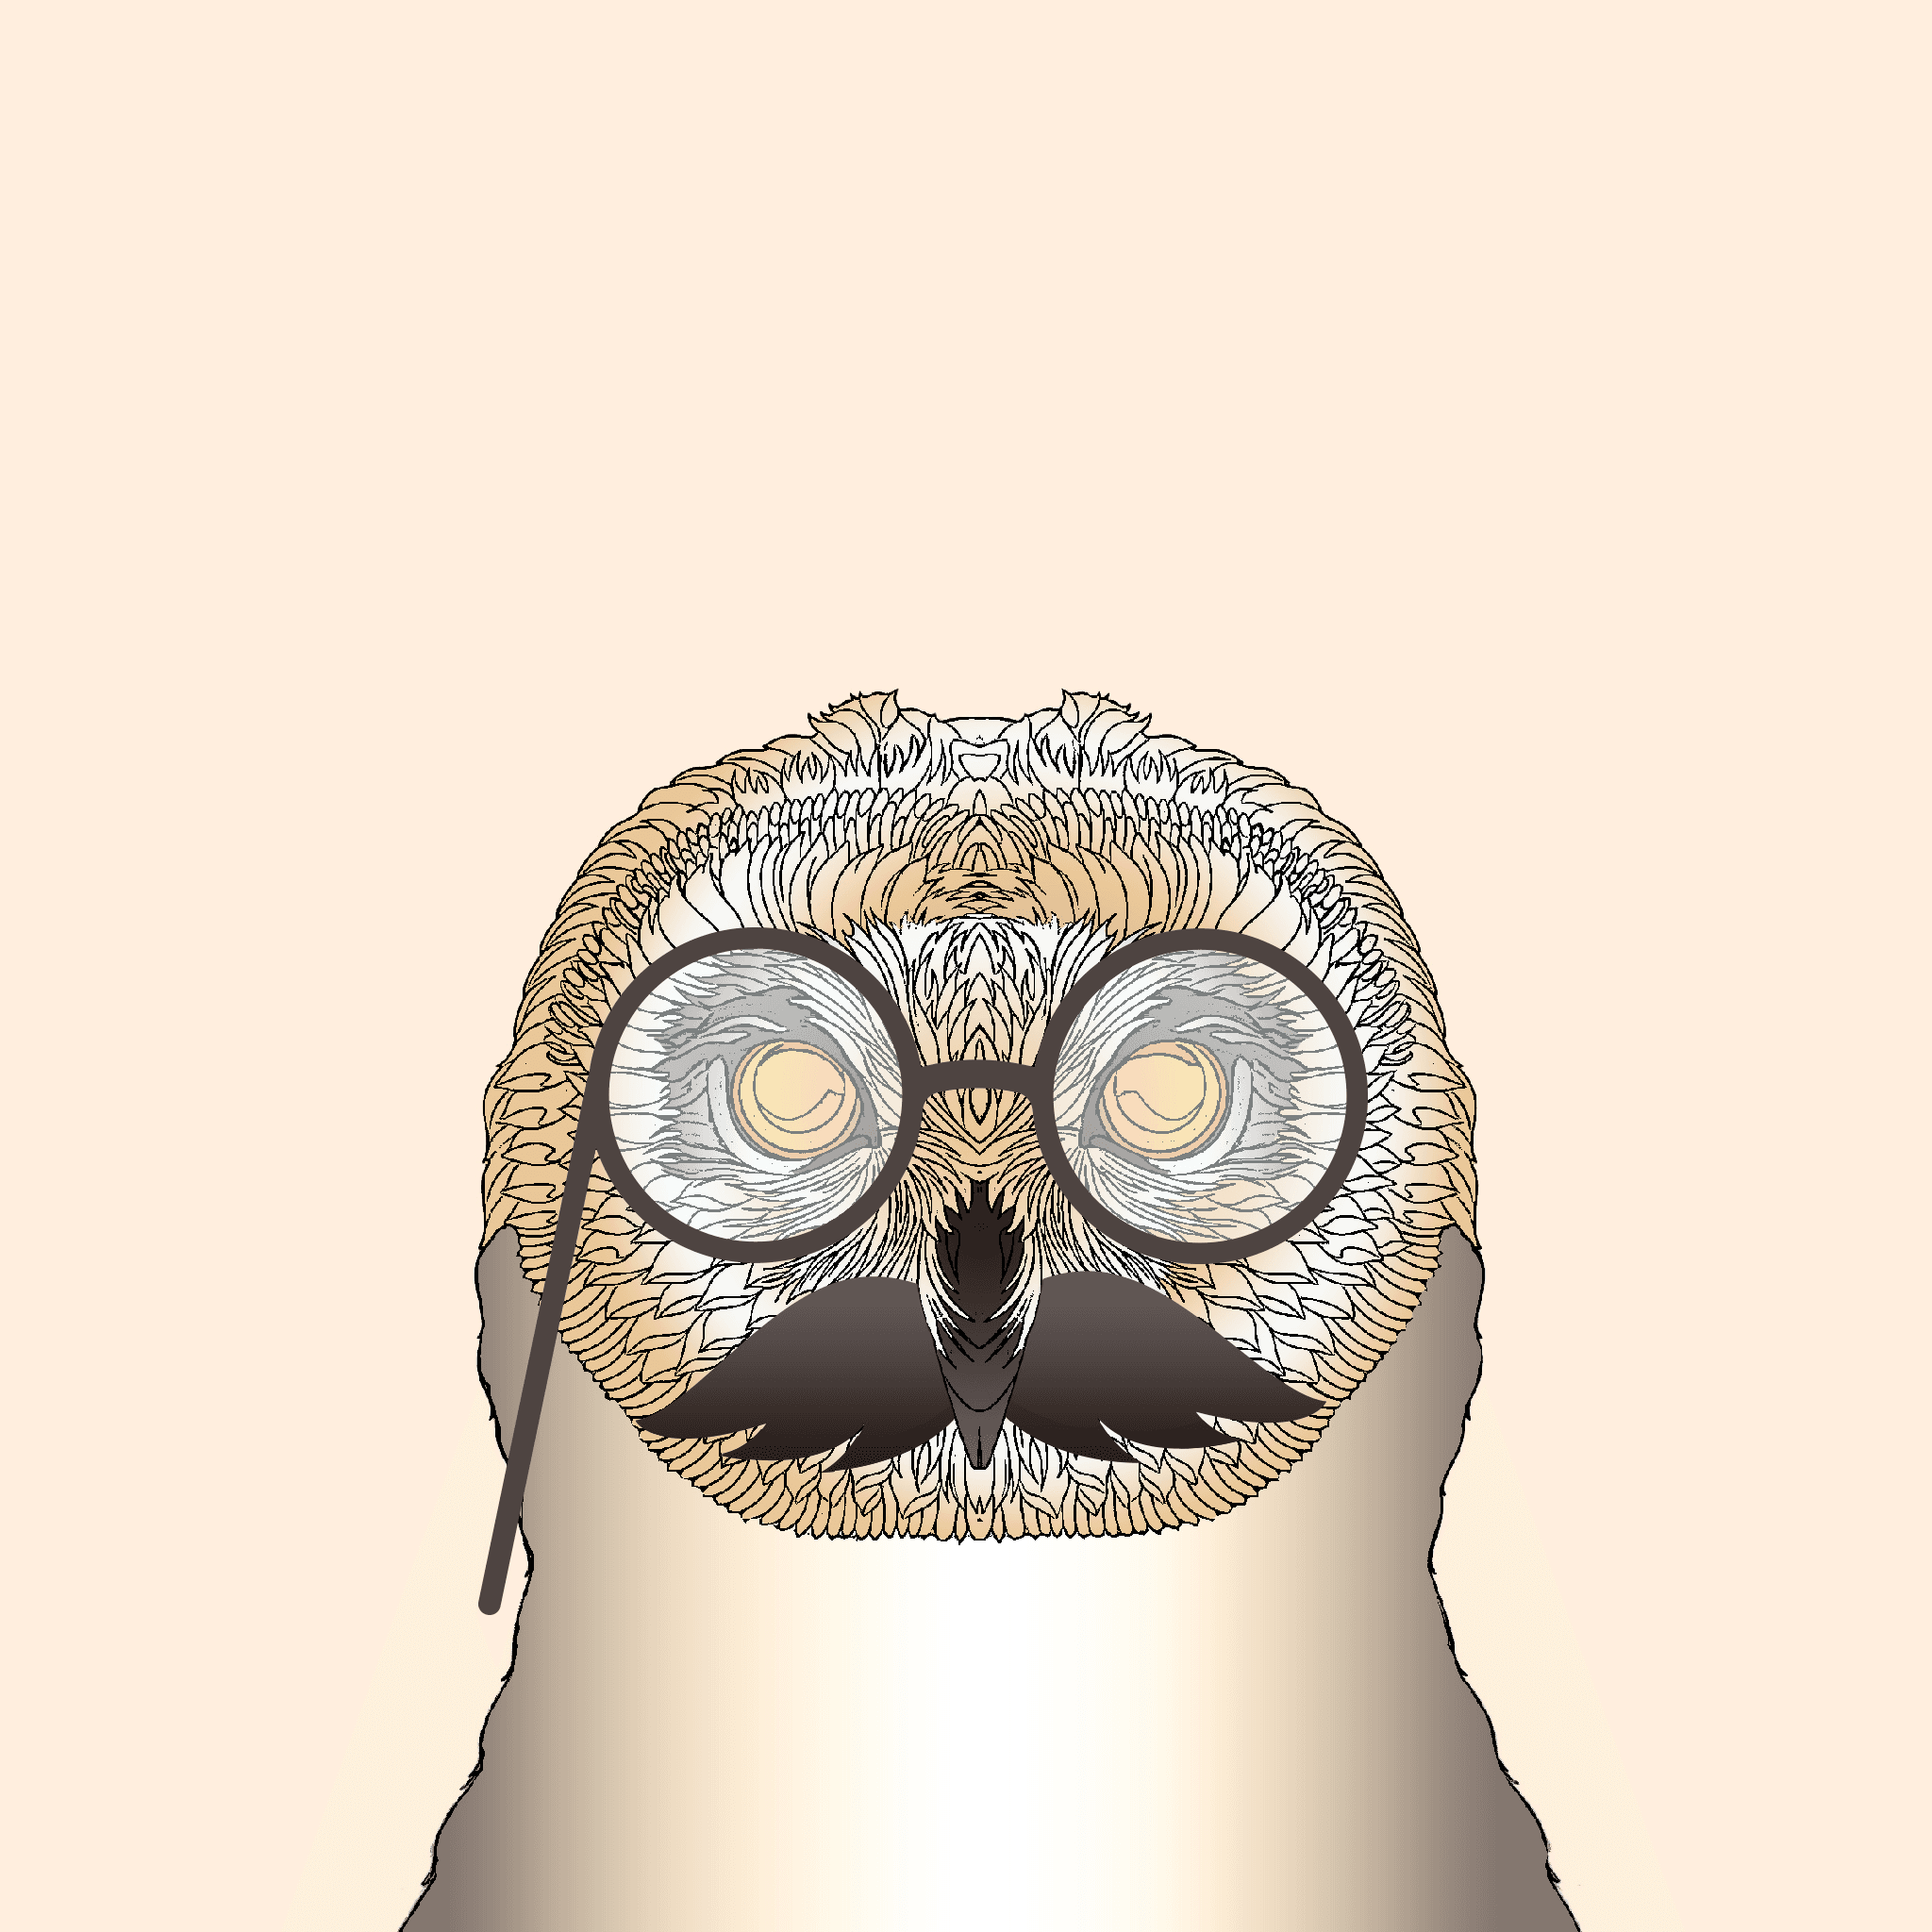 Owls with glasses and mustache